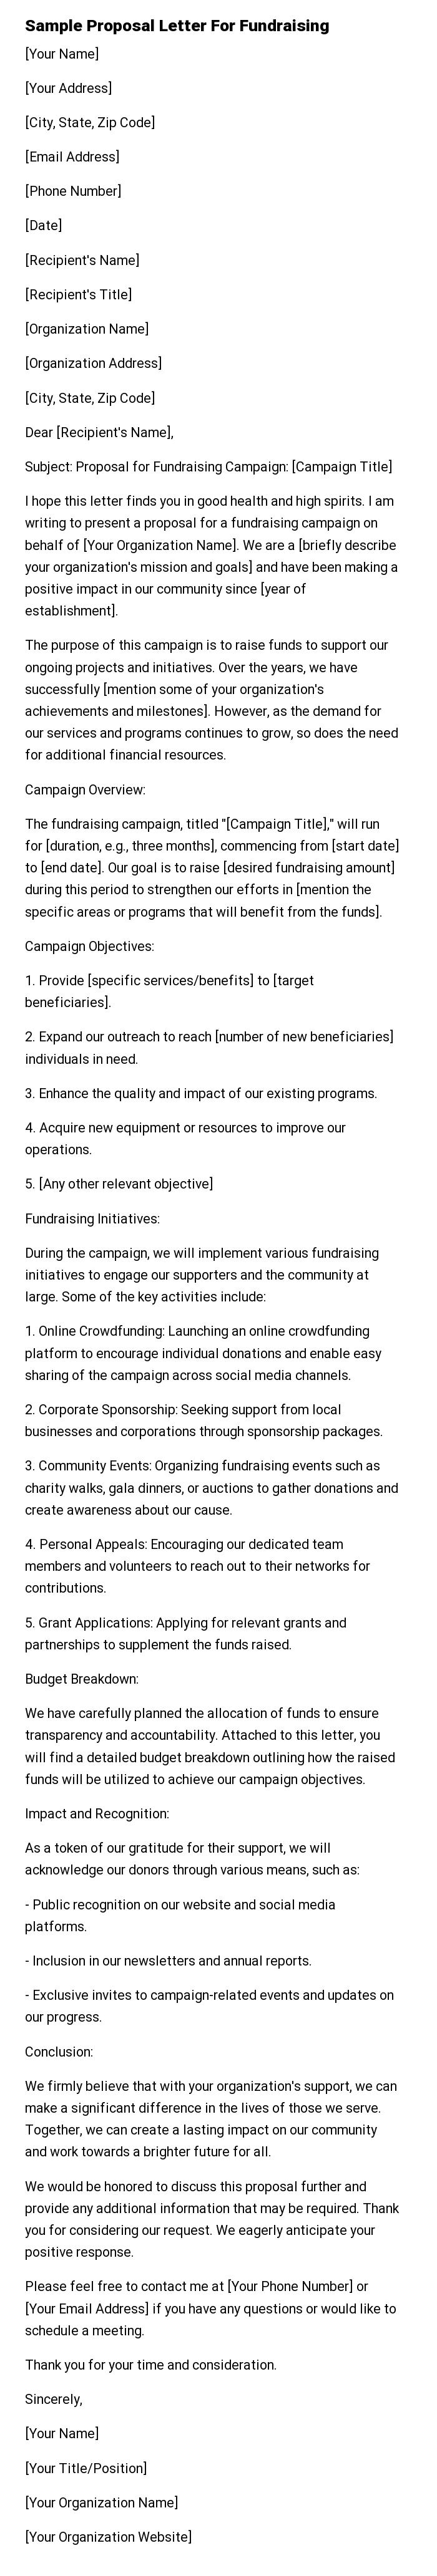 Sample Proposal Letter For Fundraising